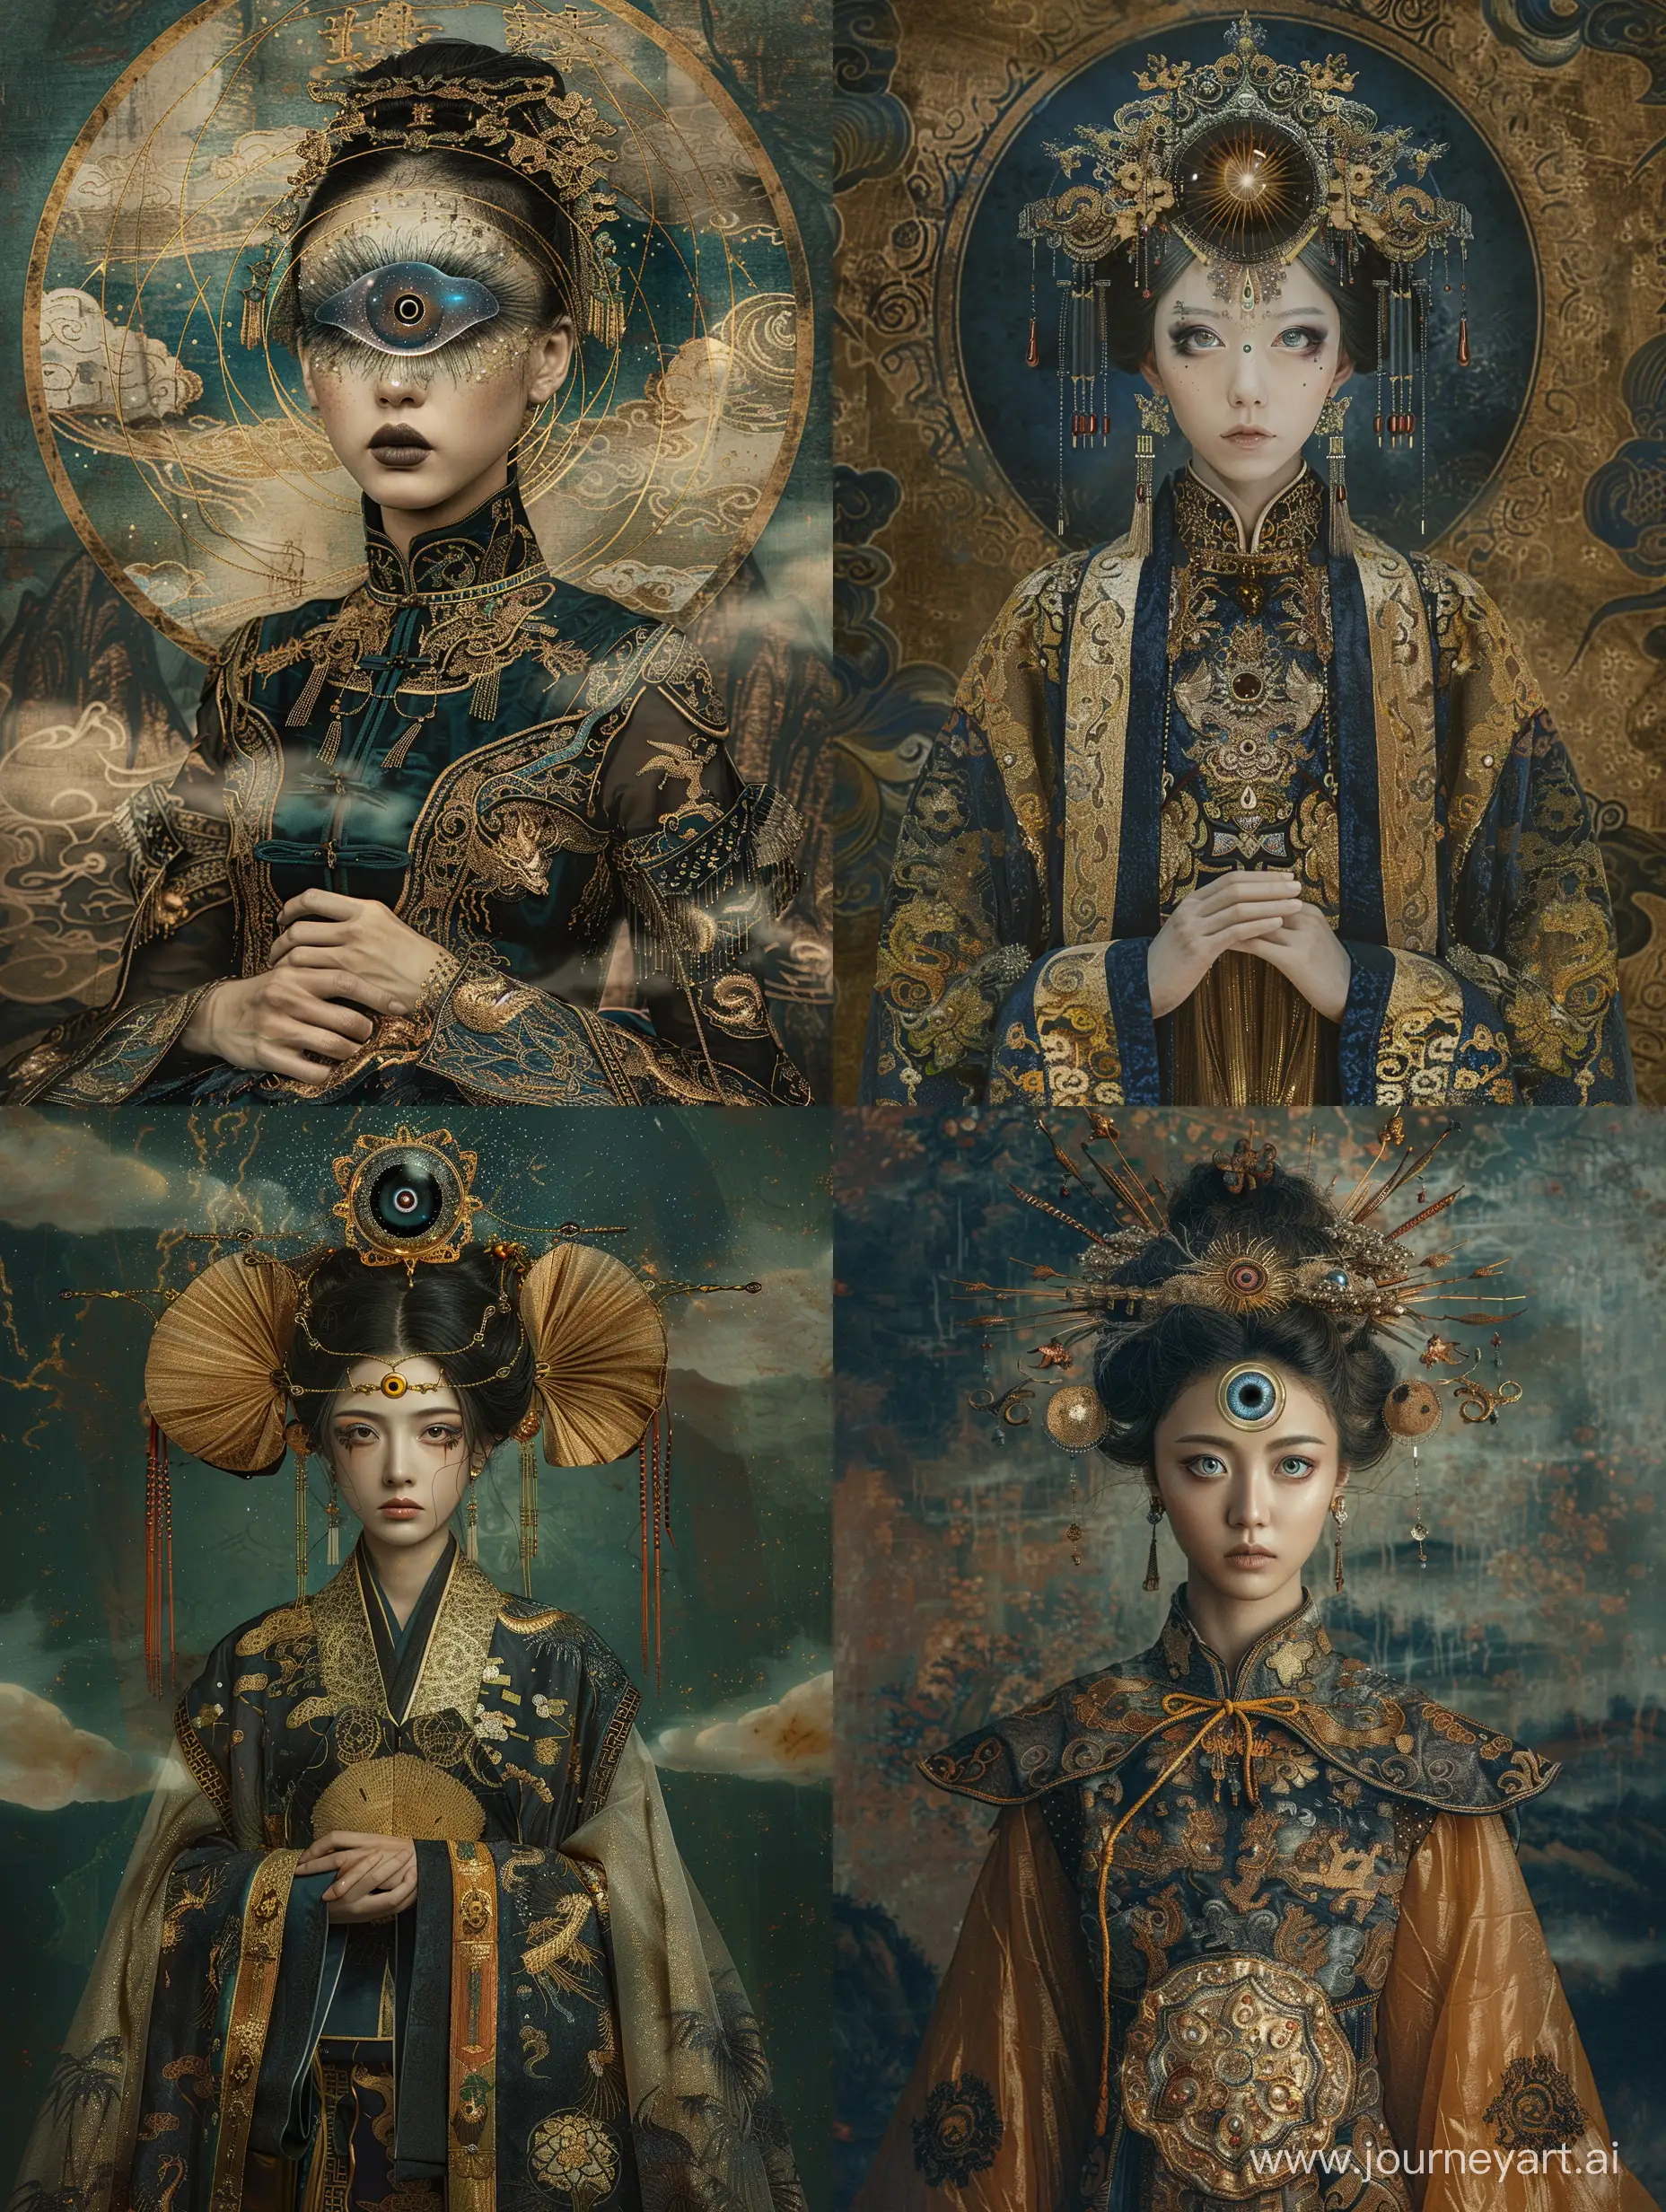 Mystical-Portrait-of-an-Asian-Woman-in-Traditional-Chinese-Attire-with-Cosmic-Eye